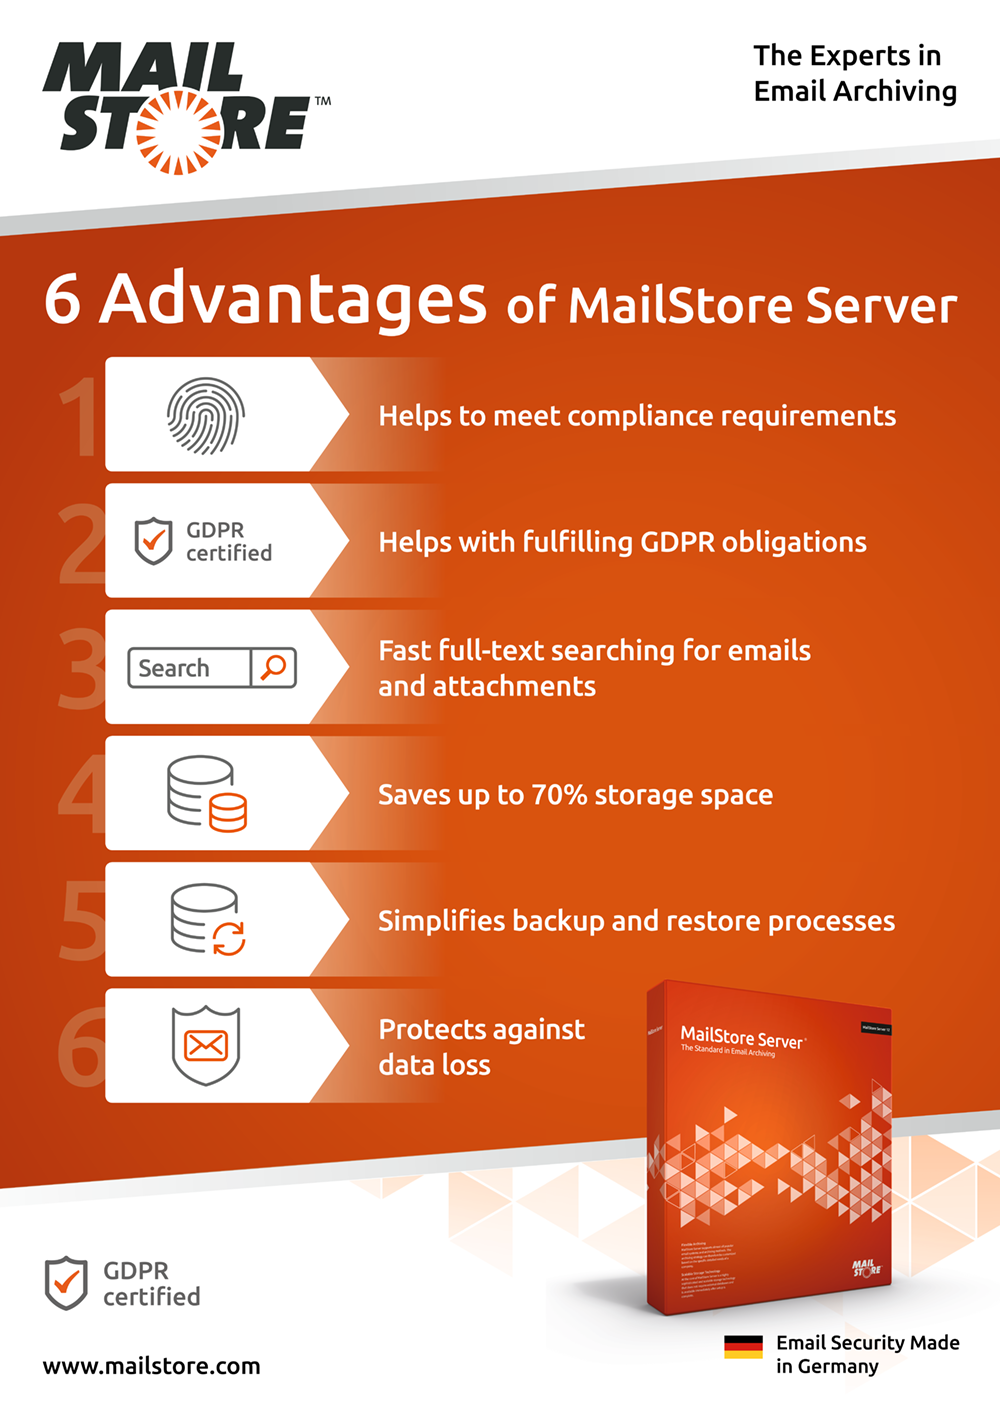 Migrating to Microsoft 365, but keep your email archive with Mailstore